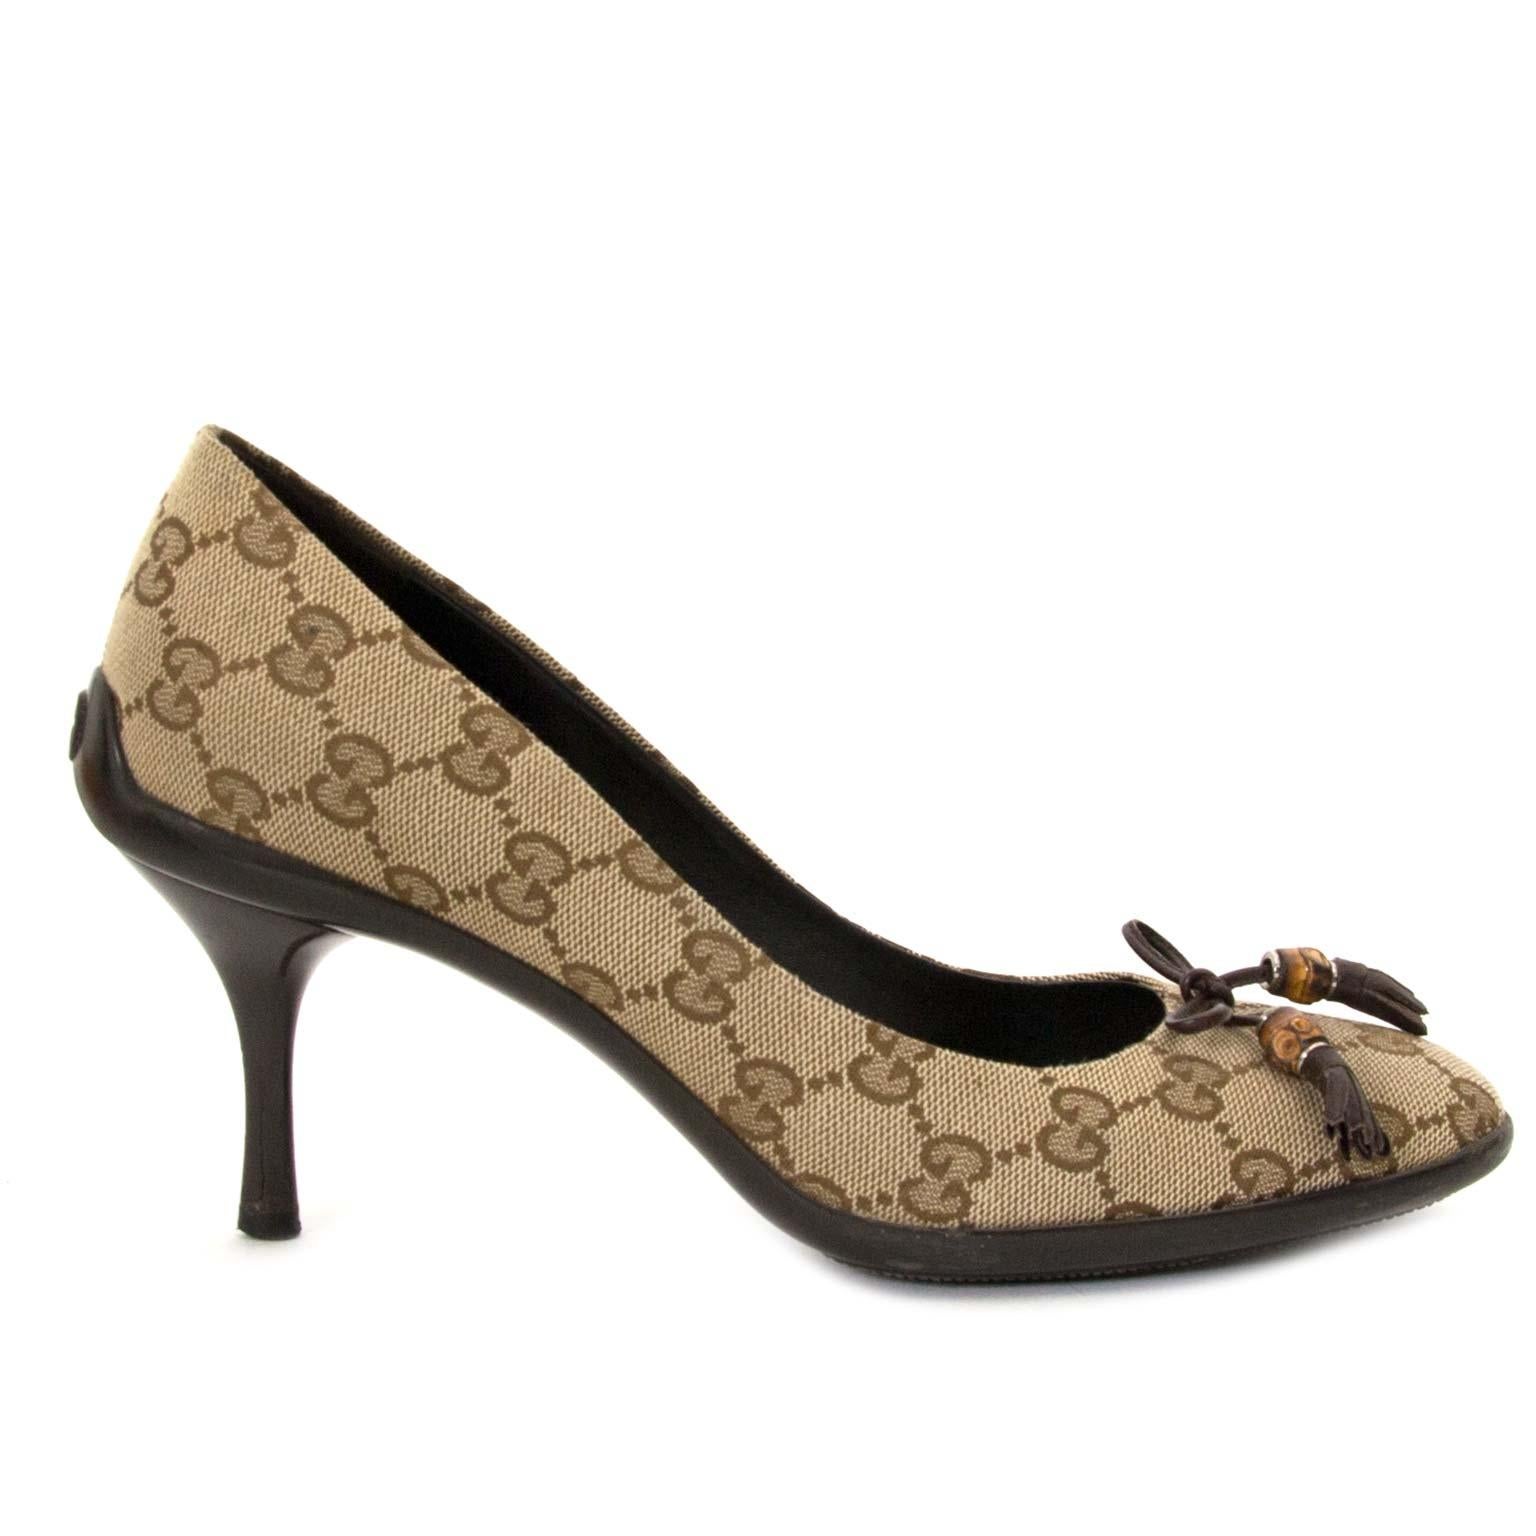 Very good condition

Gucci Monogram Pumps - Size 37

Monogram is back and hotter than ever!
These gorgeous Gucci pumps are crafted in monogram fabric and feature brown leather details.
